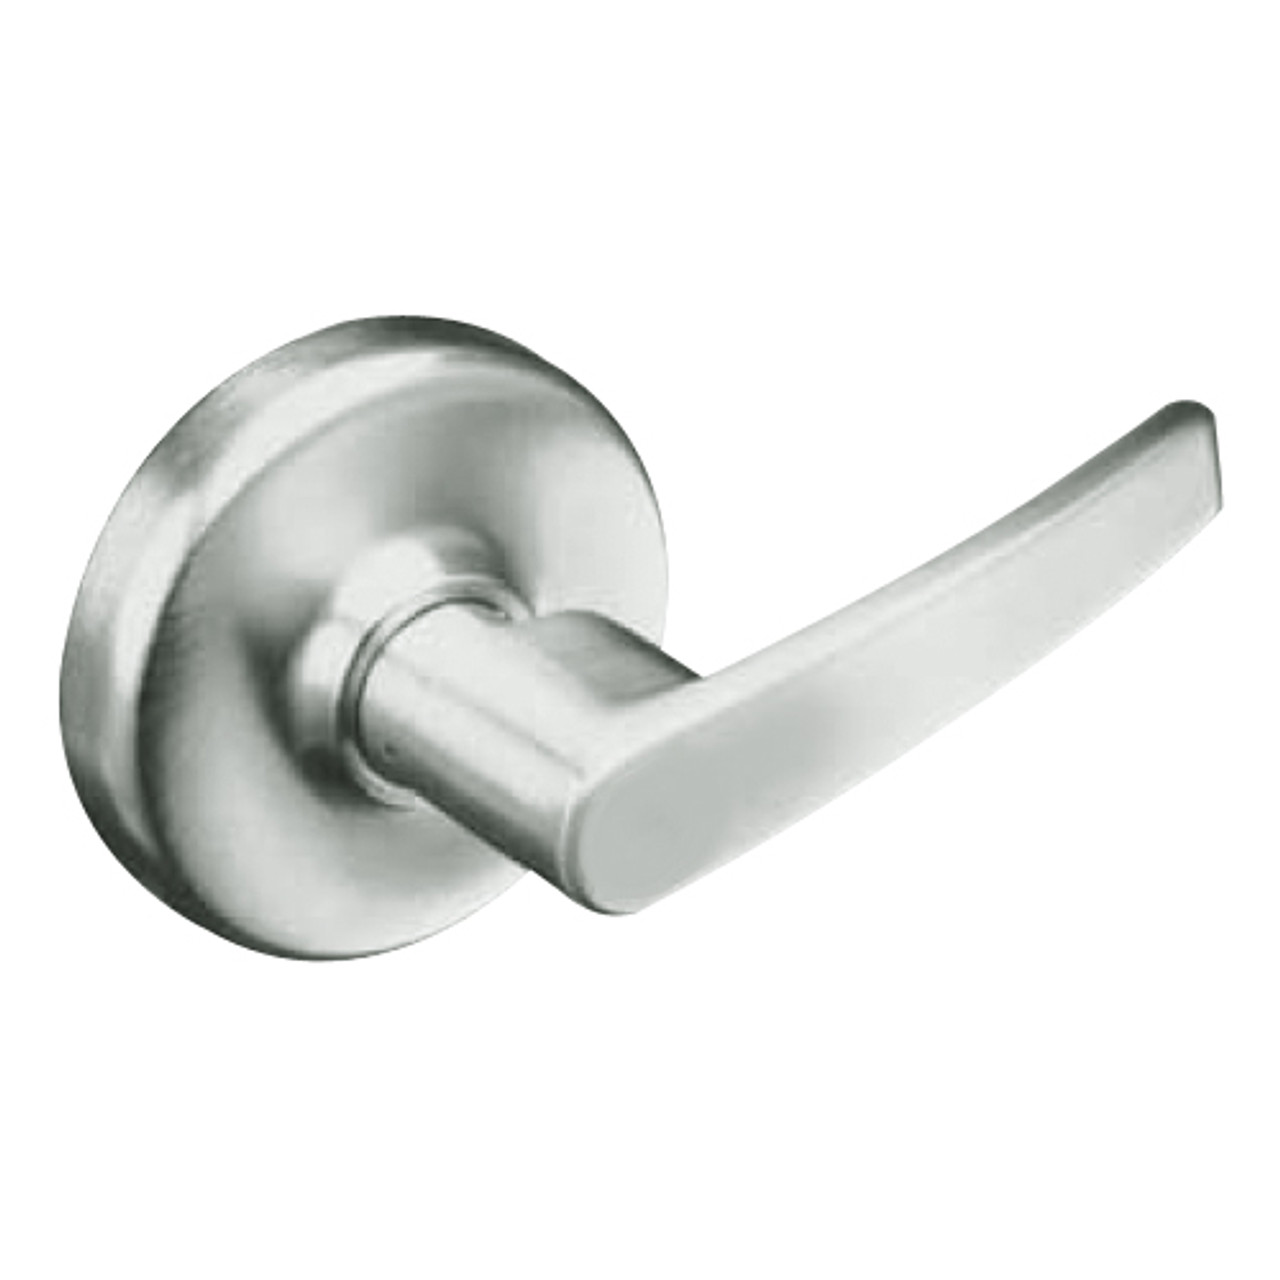 CL3110-AZD-618 Corbin CL3100 Series Vandal Resistant Passage Cylindrical Locksets with Armstrong Lever in Bright Nickel Plated Finish